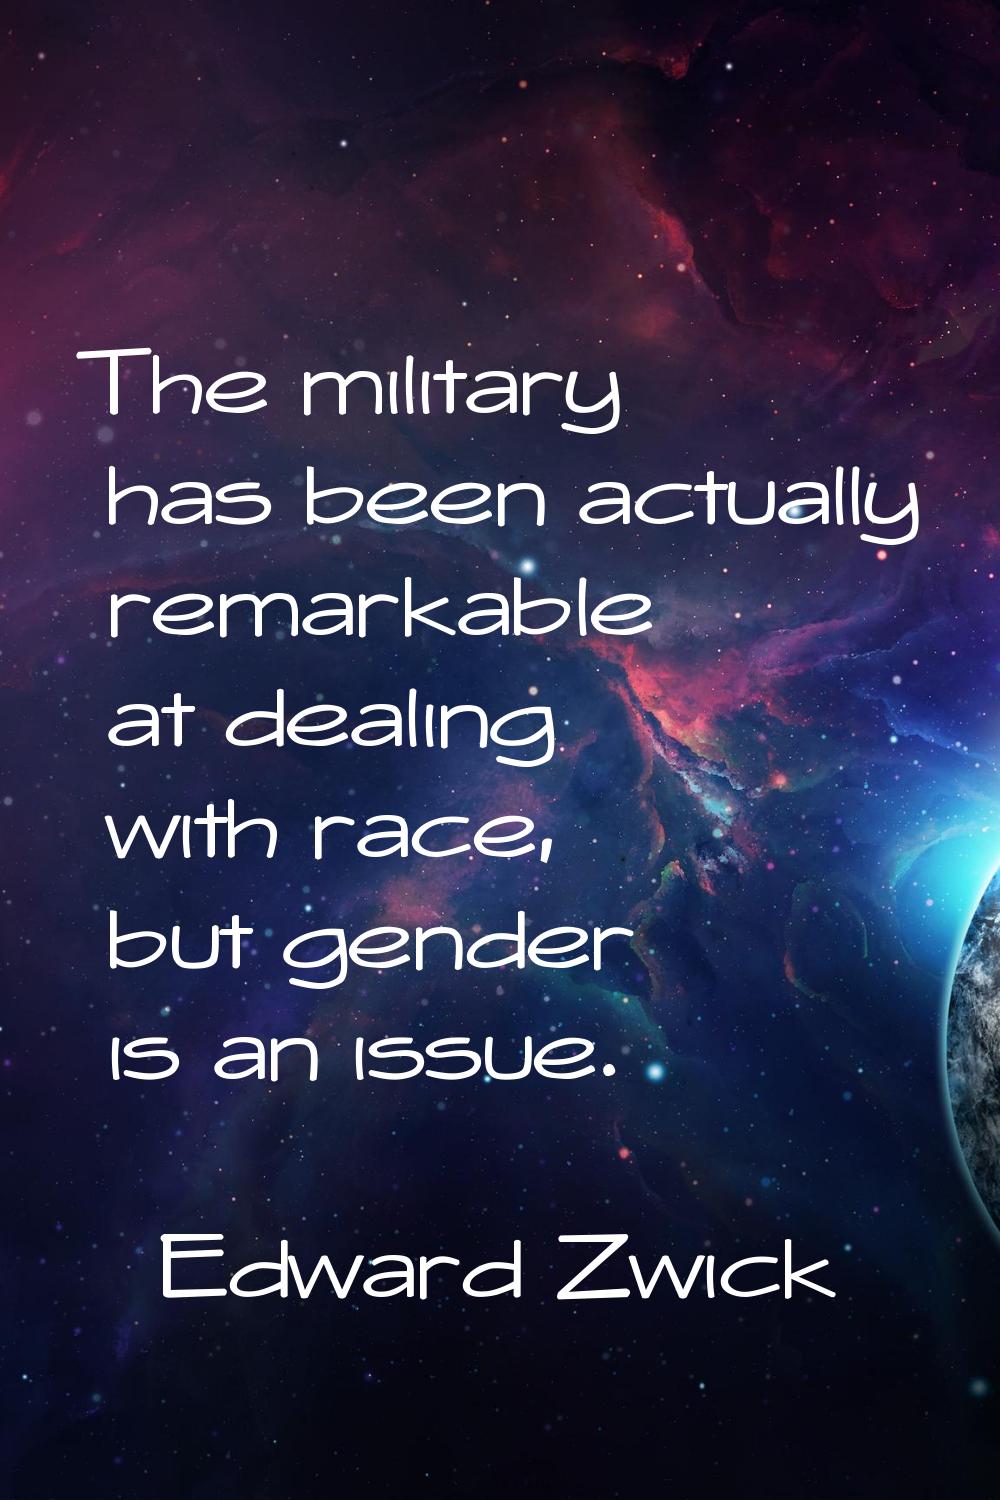 The military has been actually remarkable at dealing with race, but gender is an issue.